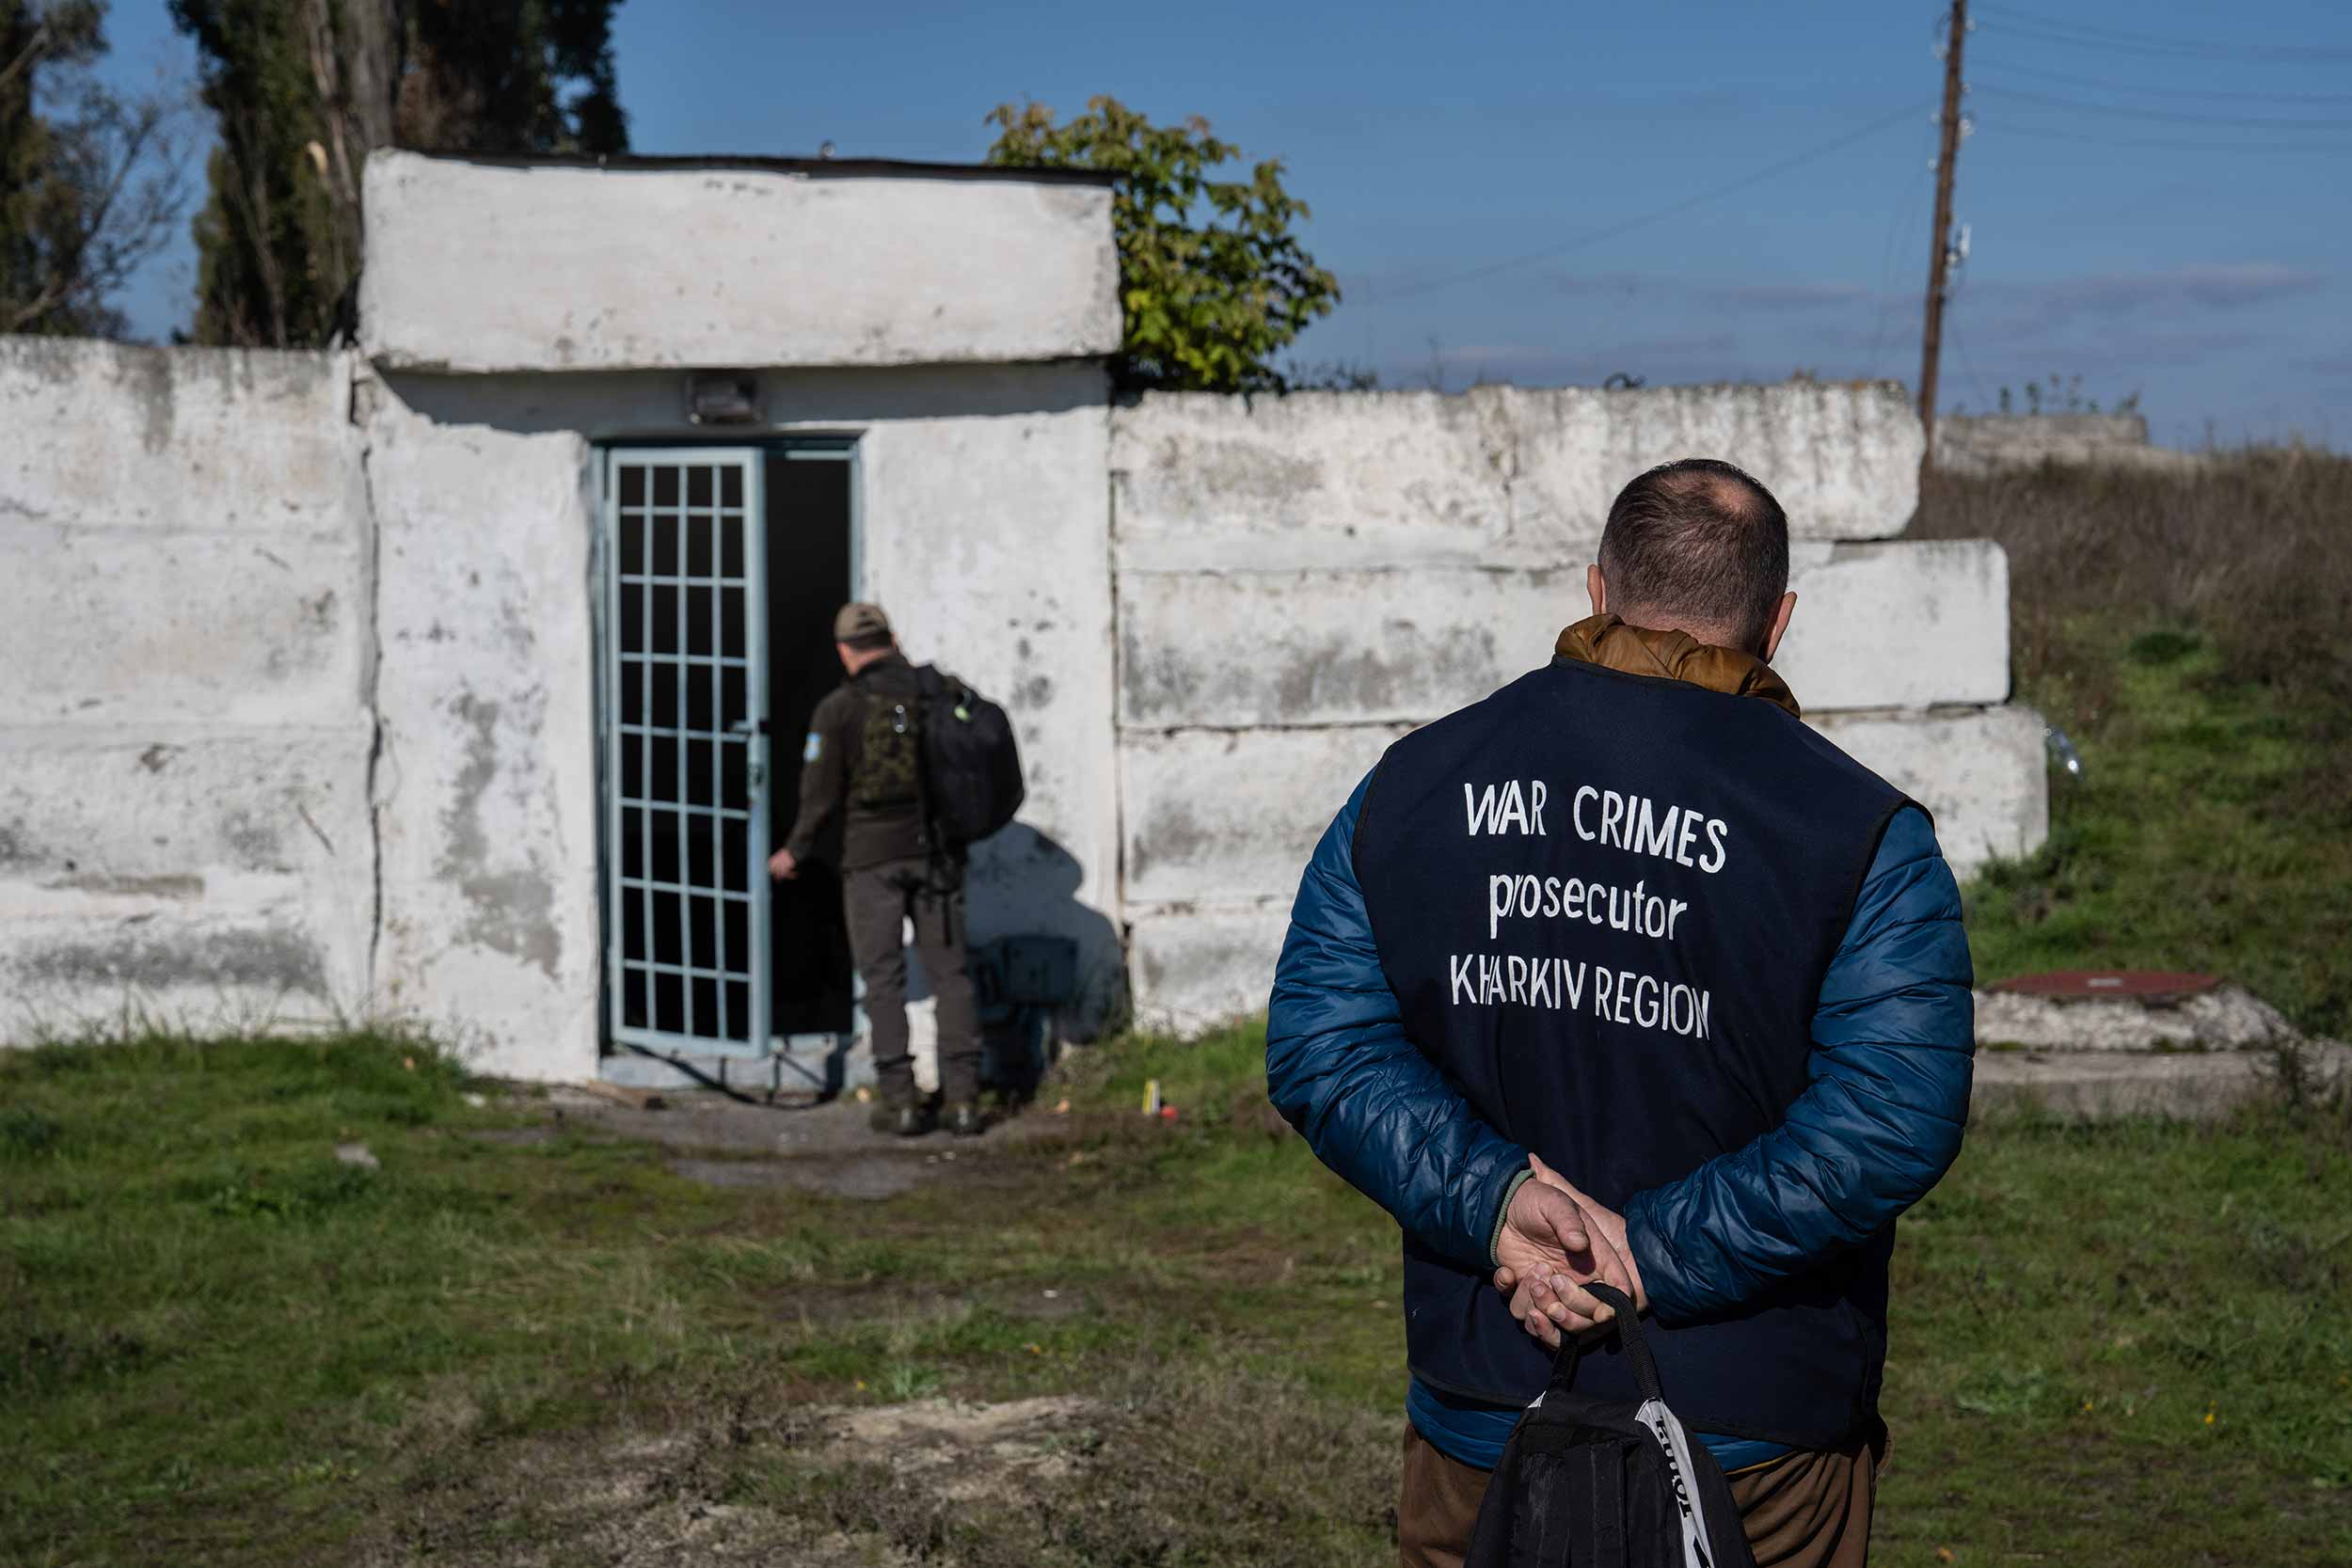 A war crimes prosecutor looks on as a police officer enters an underground air raid shelter that was believed to be used as a prison by Russian occupying forces during a search for evidence of war crimes on October 15, 2022 in Kupiansk, Kharkiv oblast, Ukraine. © Carl Court/Getty Images